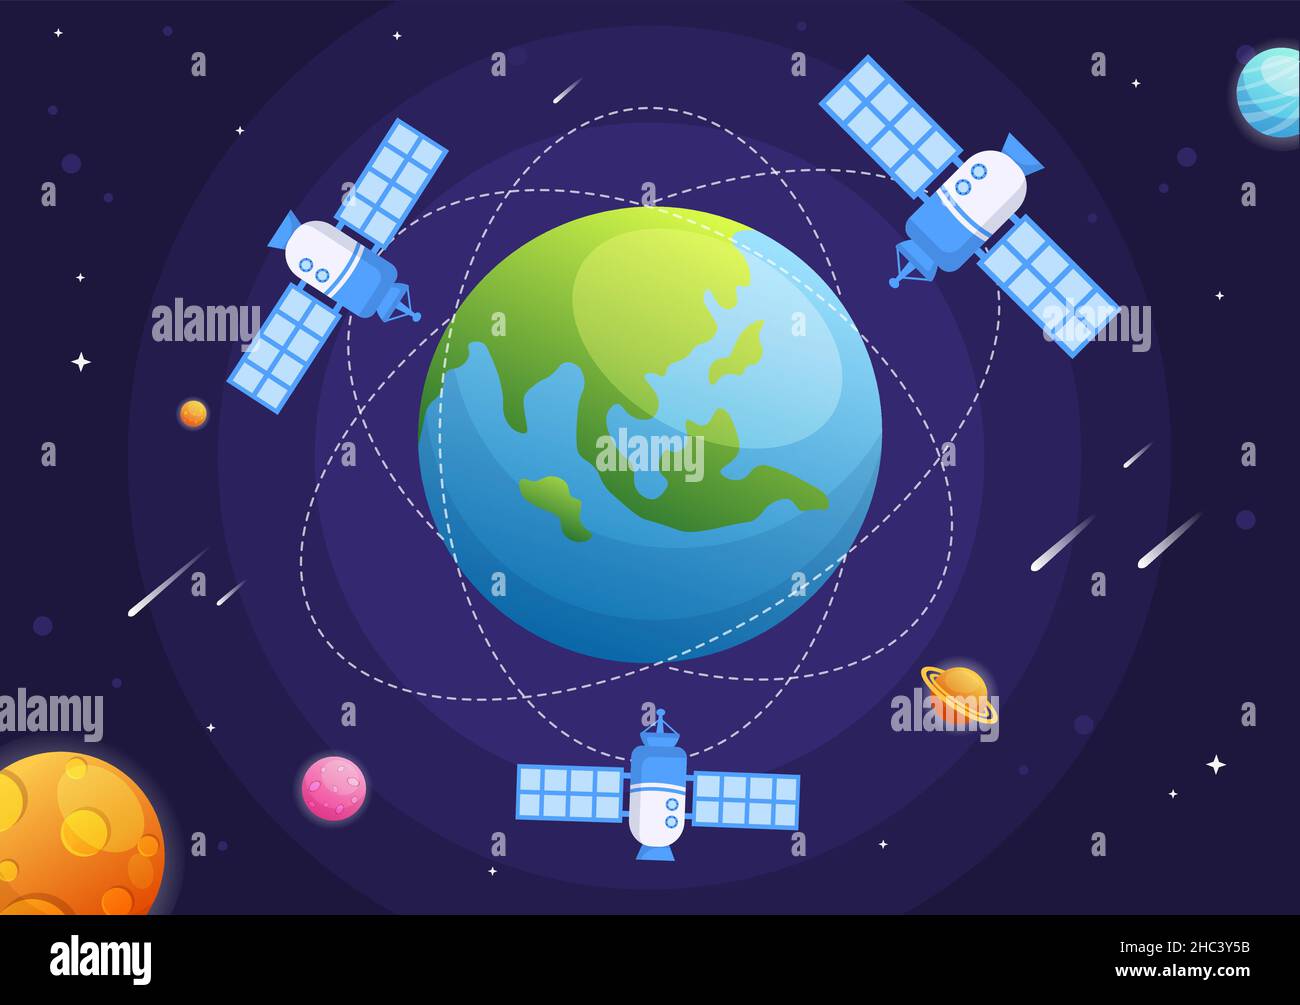 Artificial Satellites Orbiting the Planet Earth with Wireless Technology Global 5G Internet Network Satellite Communication in Background Illustration Stock Vector